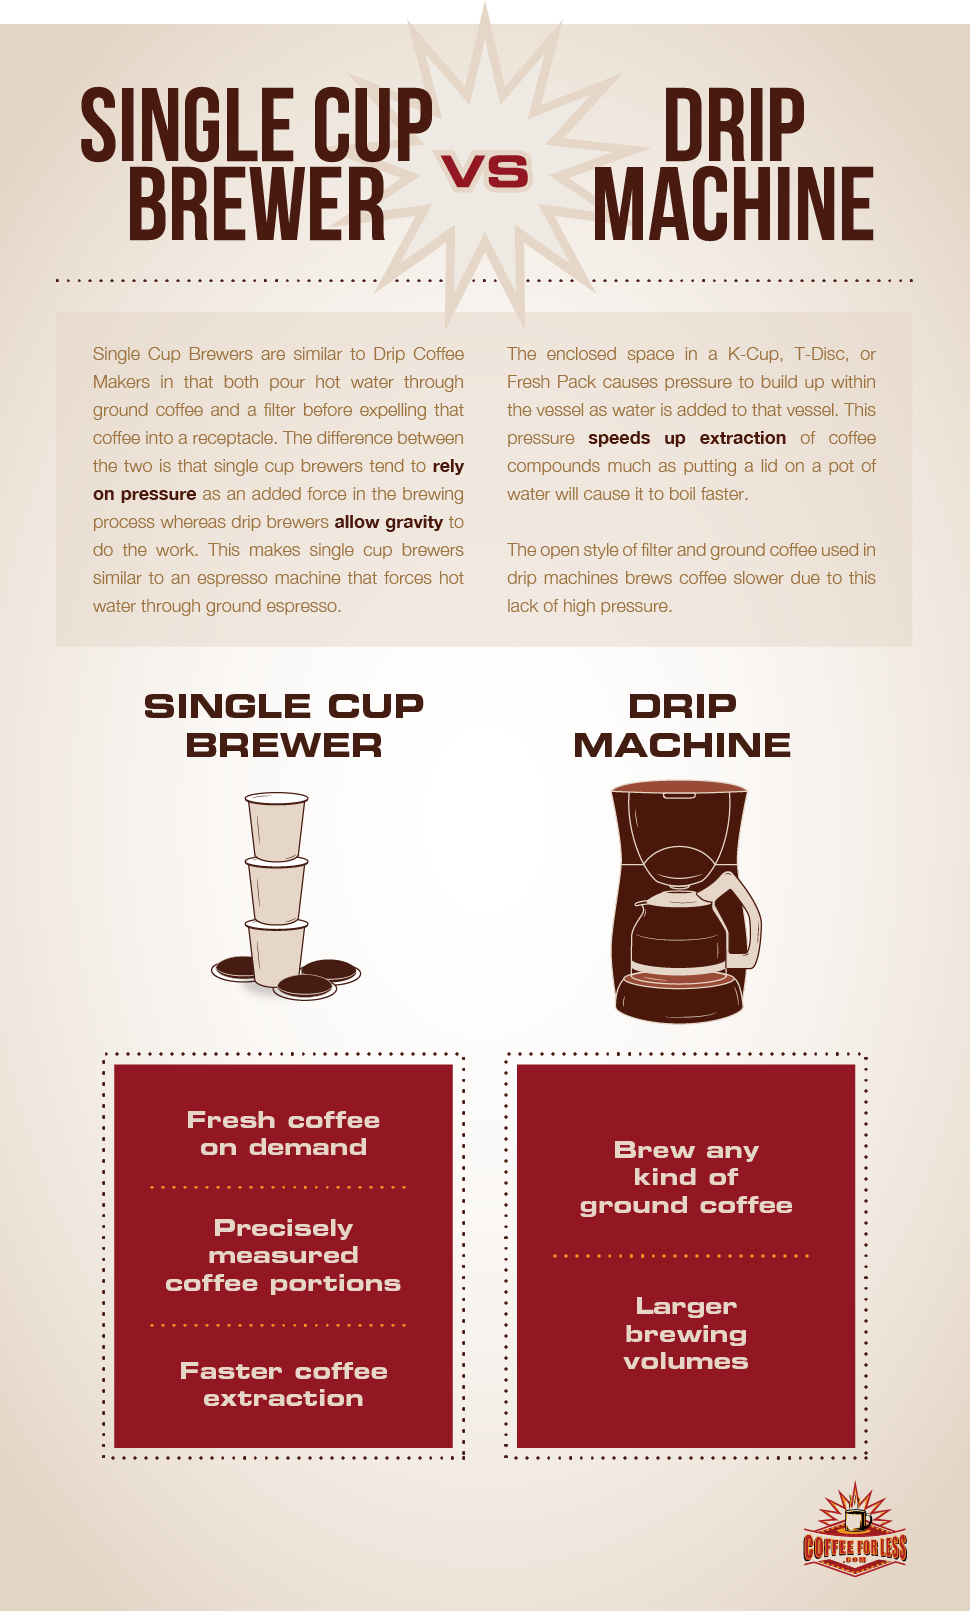 Each of these coffee brewing options has its own pros. Find out which is right for you!